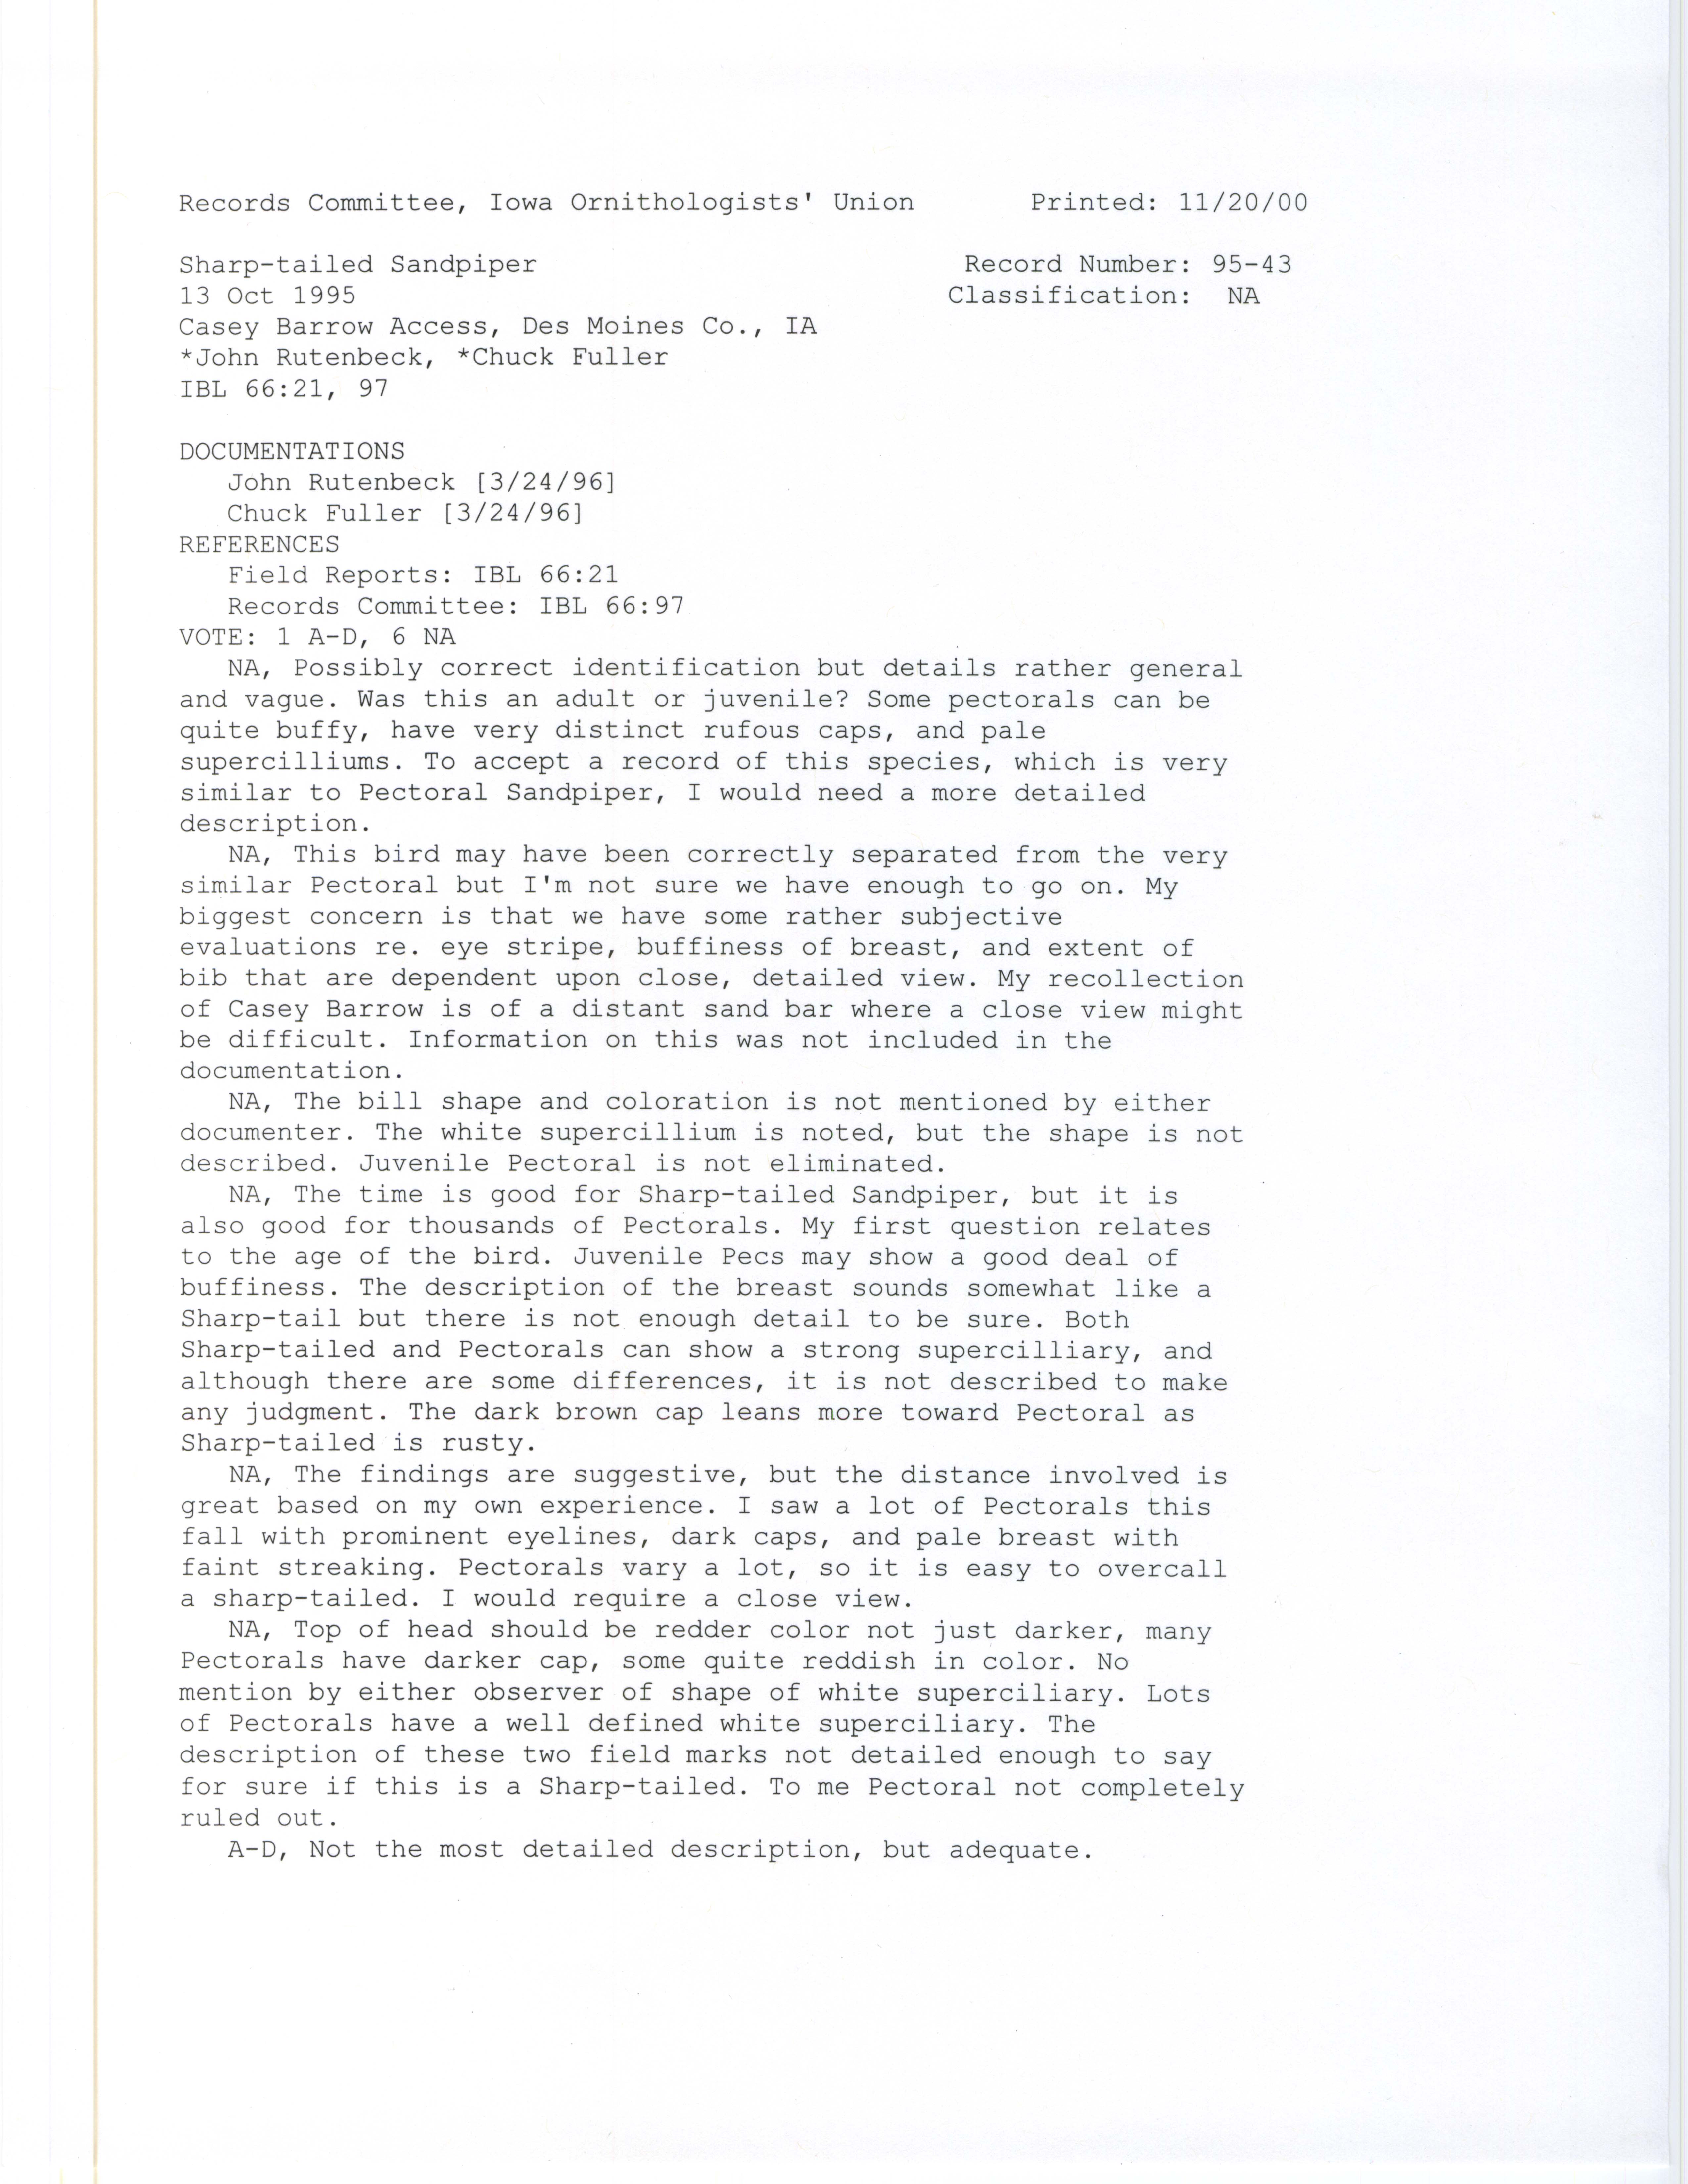 Records Committee review for rare bird sighting of Sharp-tailed Sandpiper at Casey Barrow Access, 1995